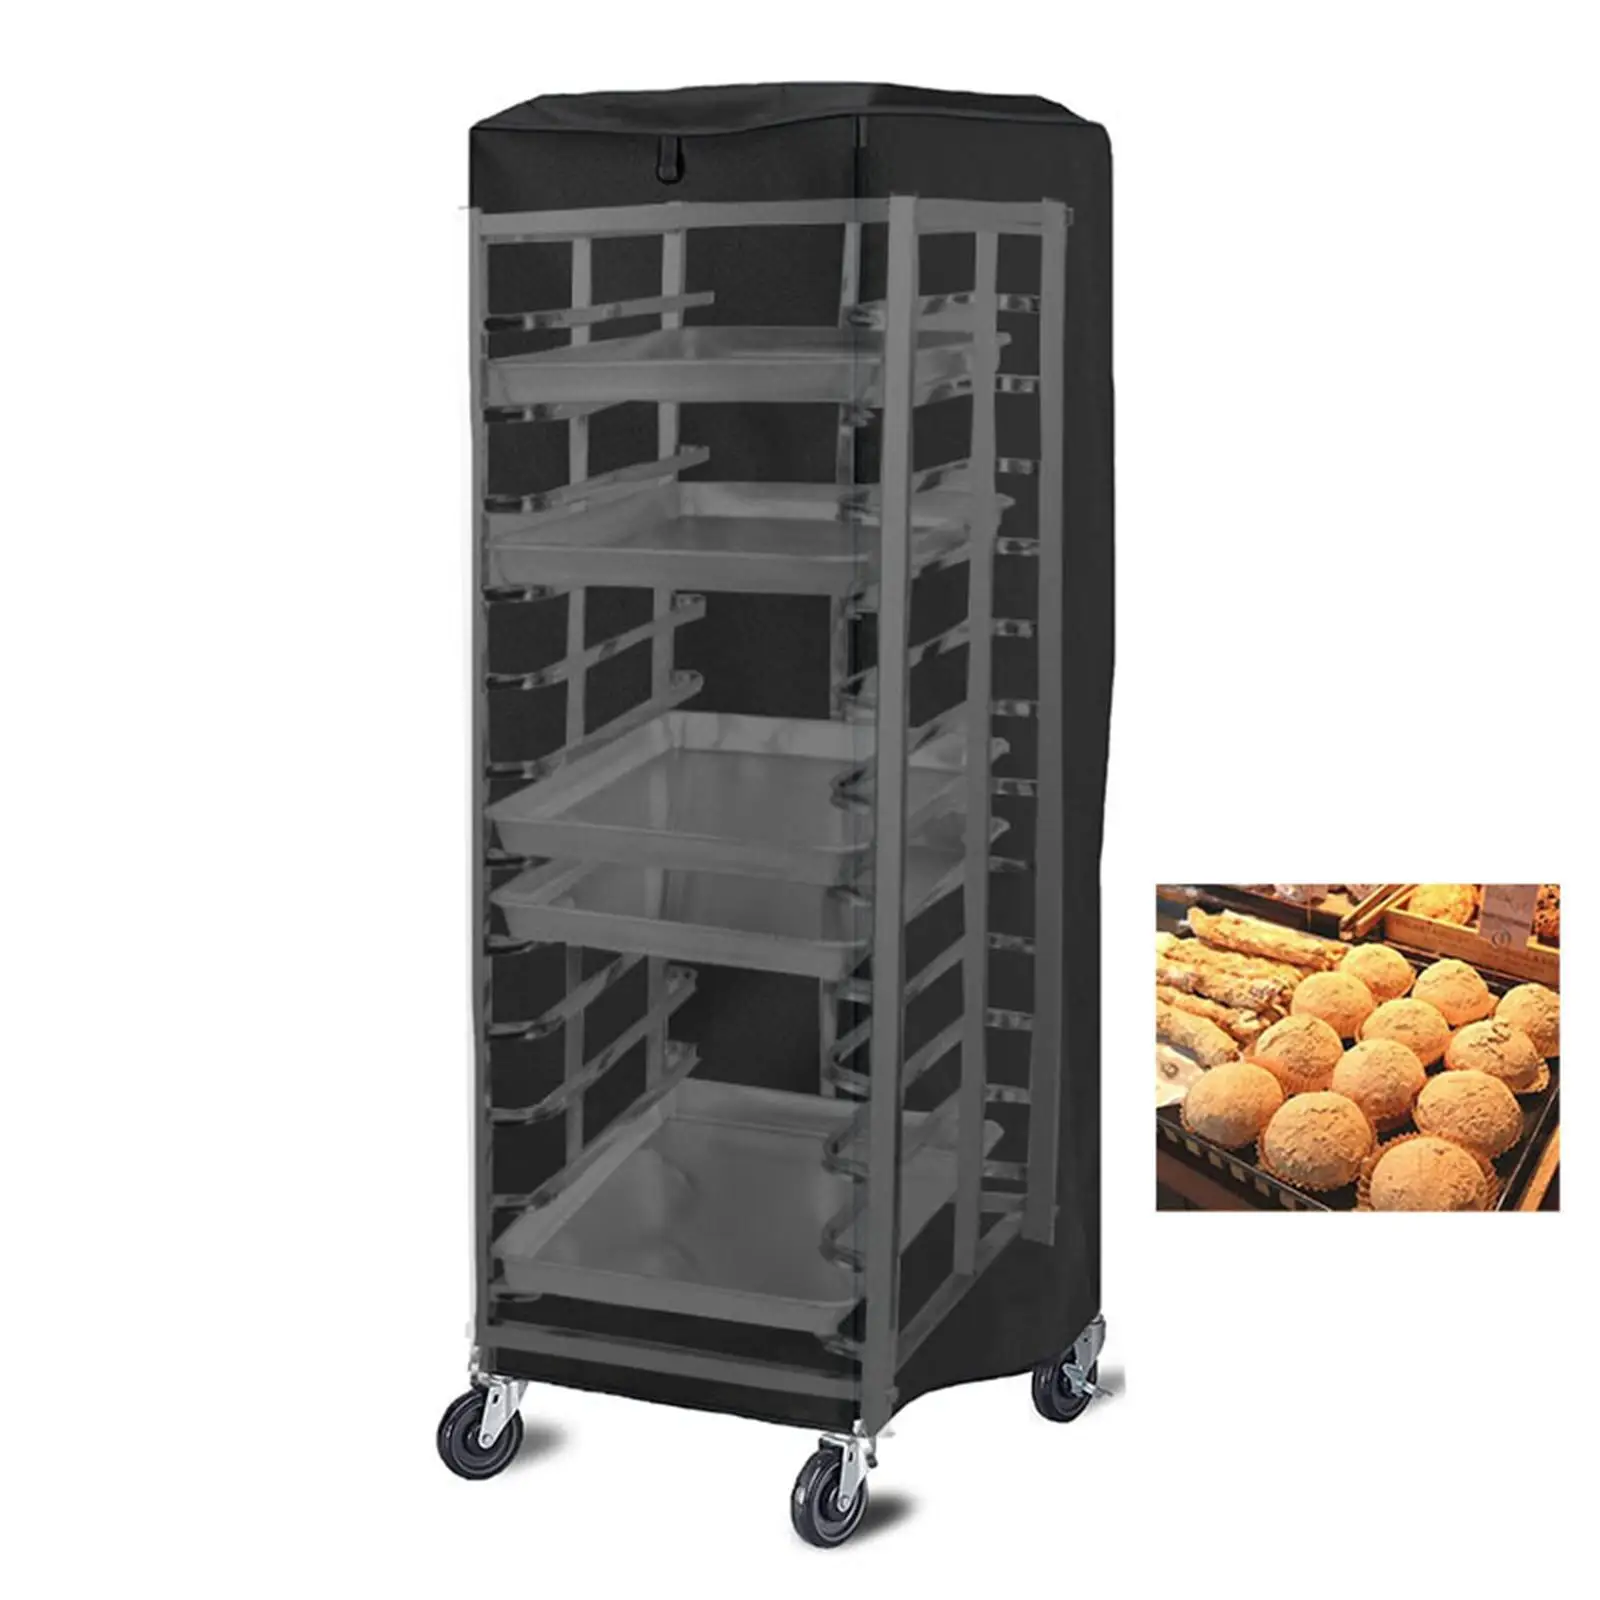 Bread Rack Cover 23``x28``x64`` High Density Protective Covers Bun Pan Rack Cover for Dining Room Bakery Kitchen Restaurant